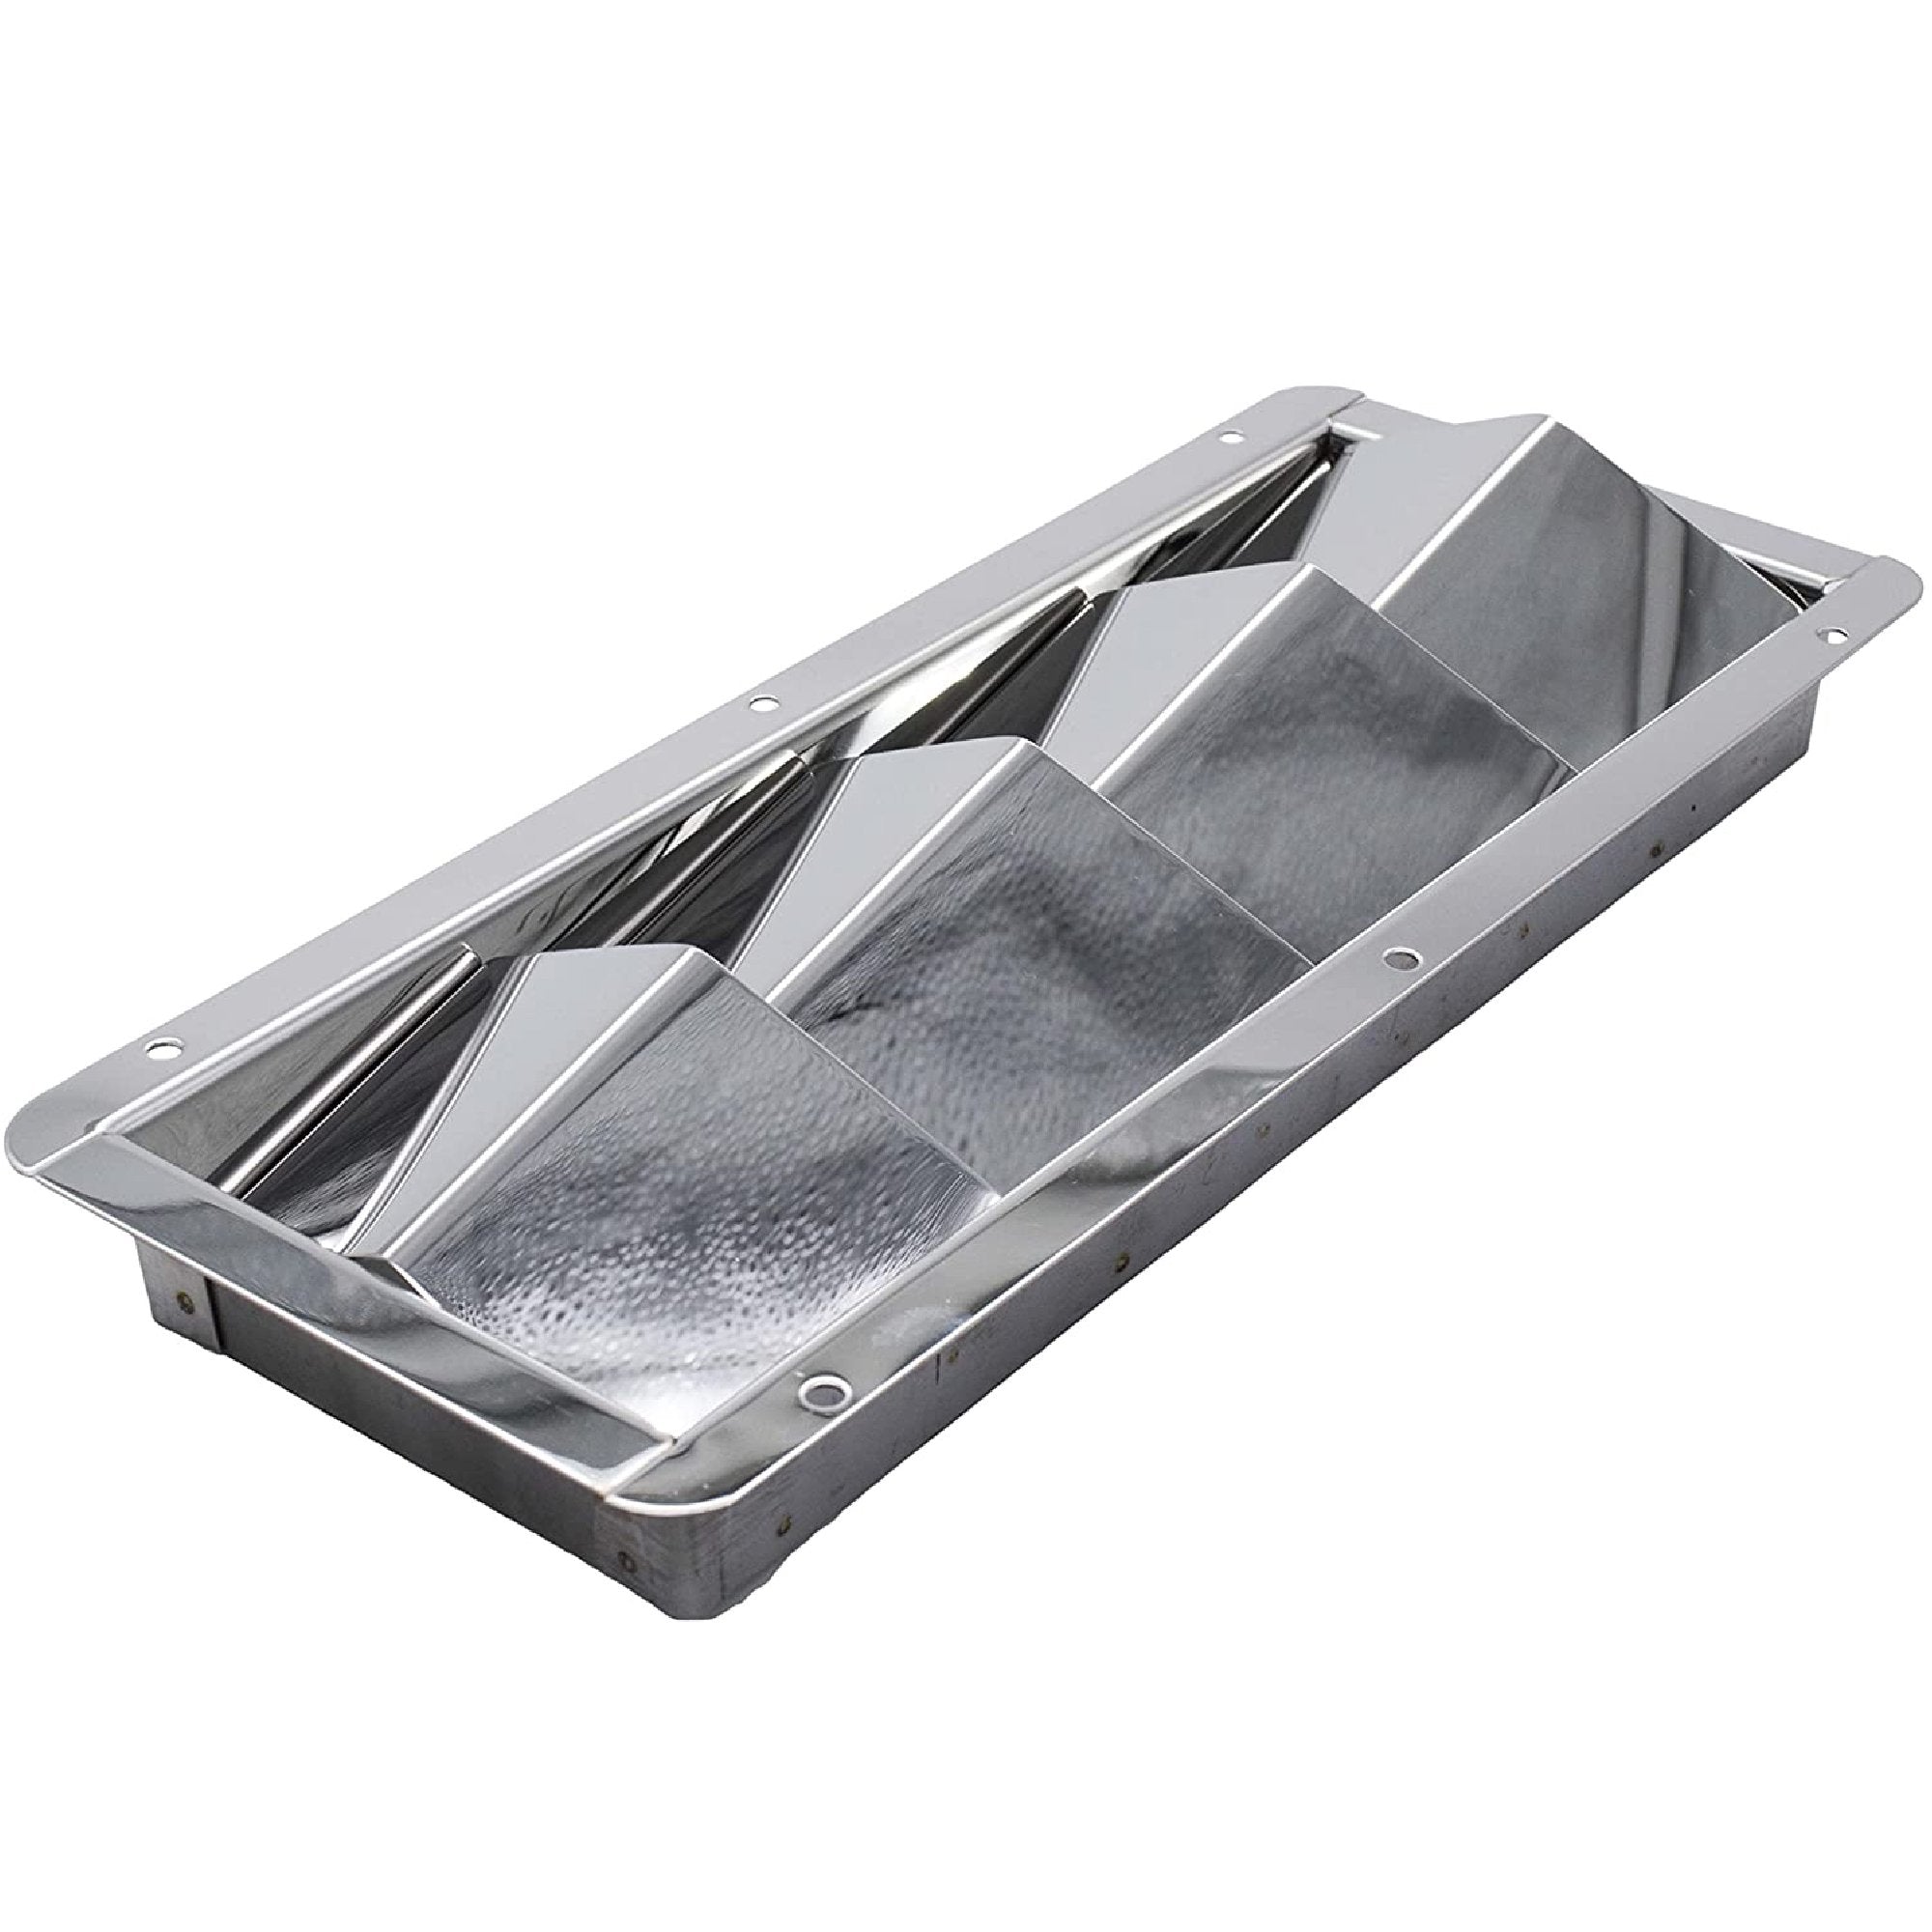 Marine City Stainless Steel Marine 4 Slots Louver Vent 10" X 4-3/8" X 1-1/2" for Boat